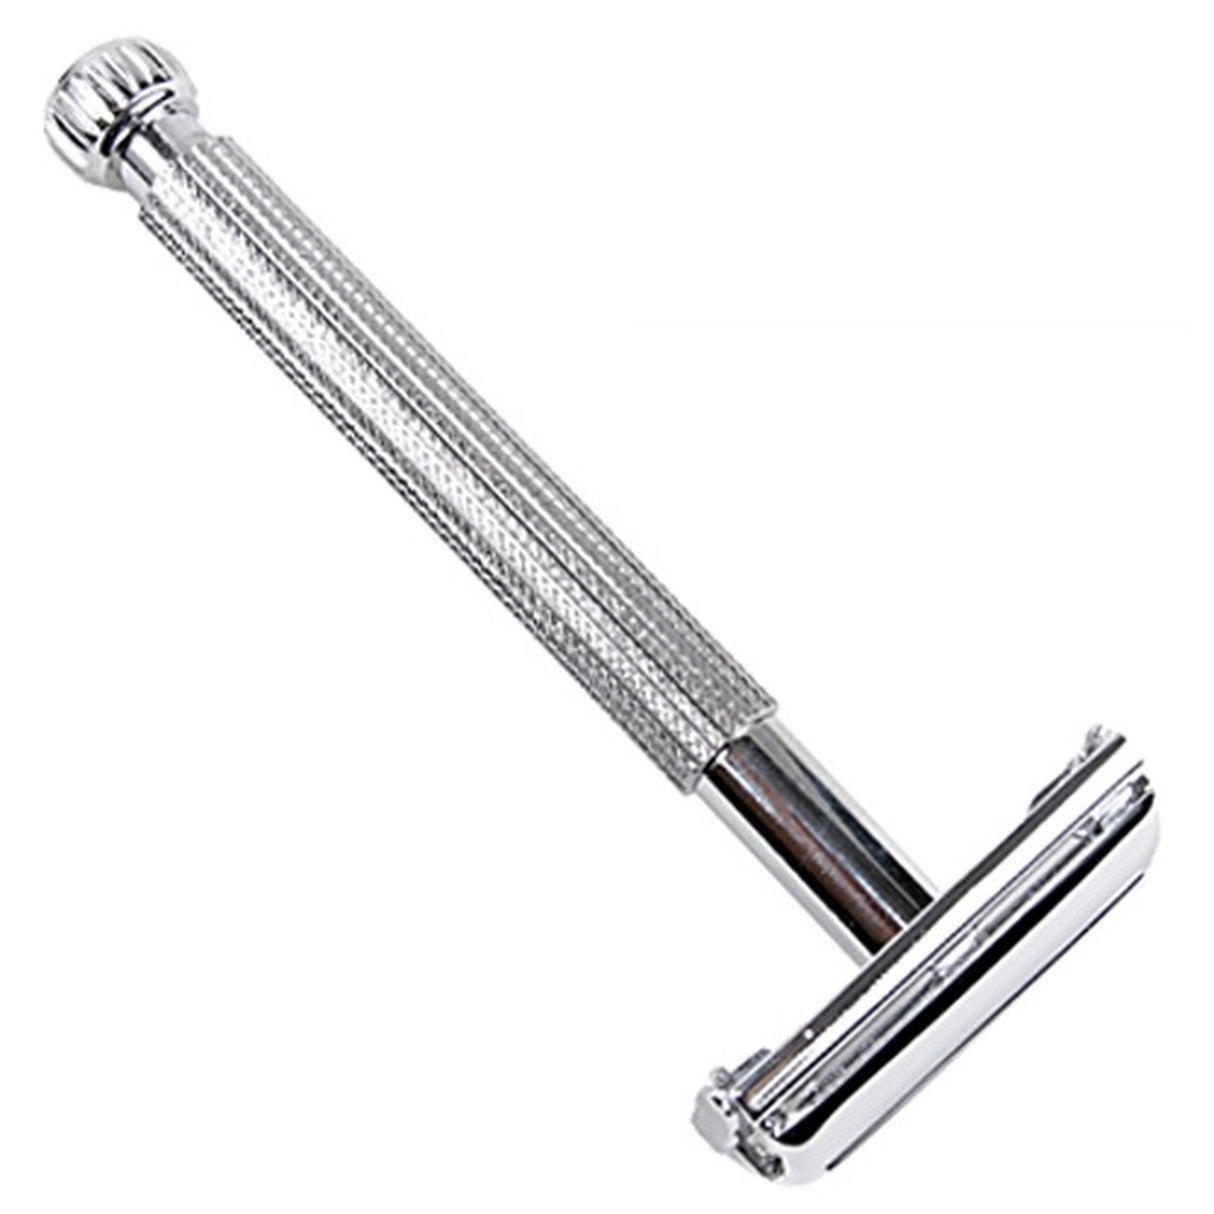 An all-natural Mountaineer Brand Products stainless steel Parker Safety Razor 29L on a white background.